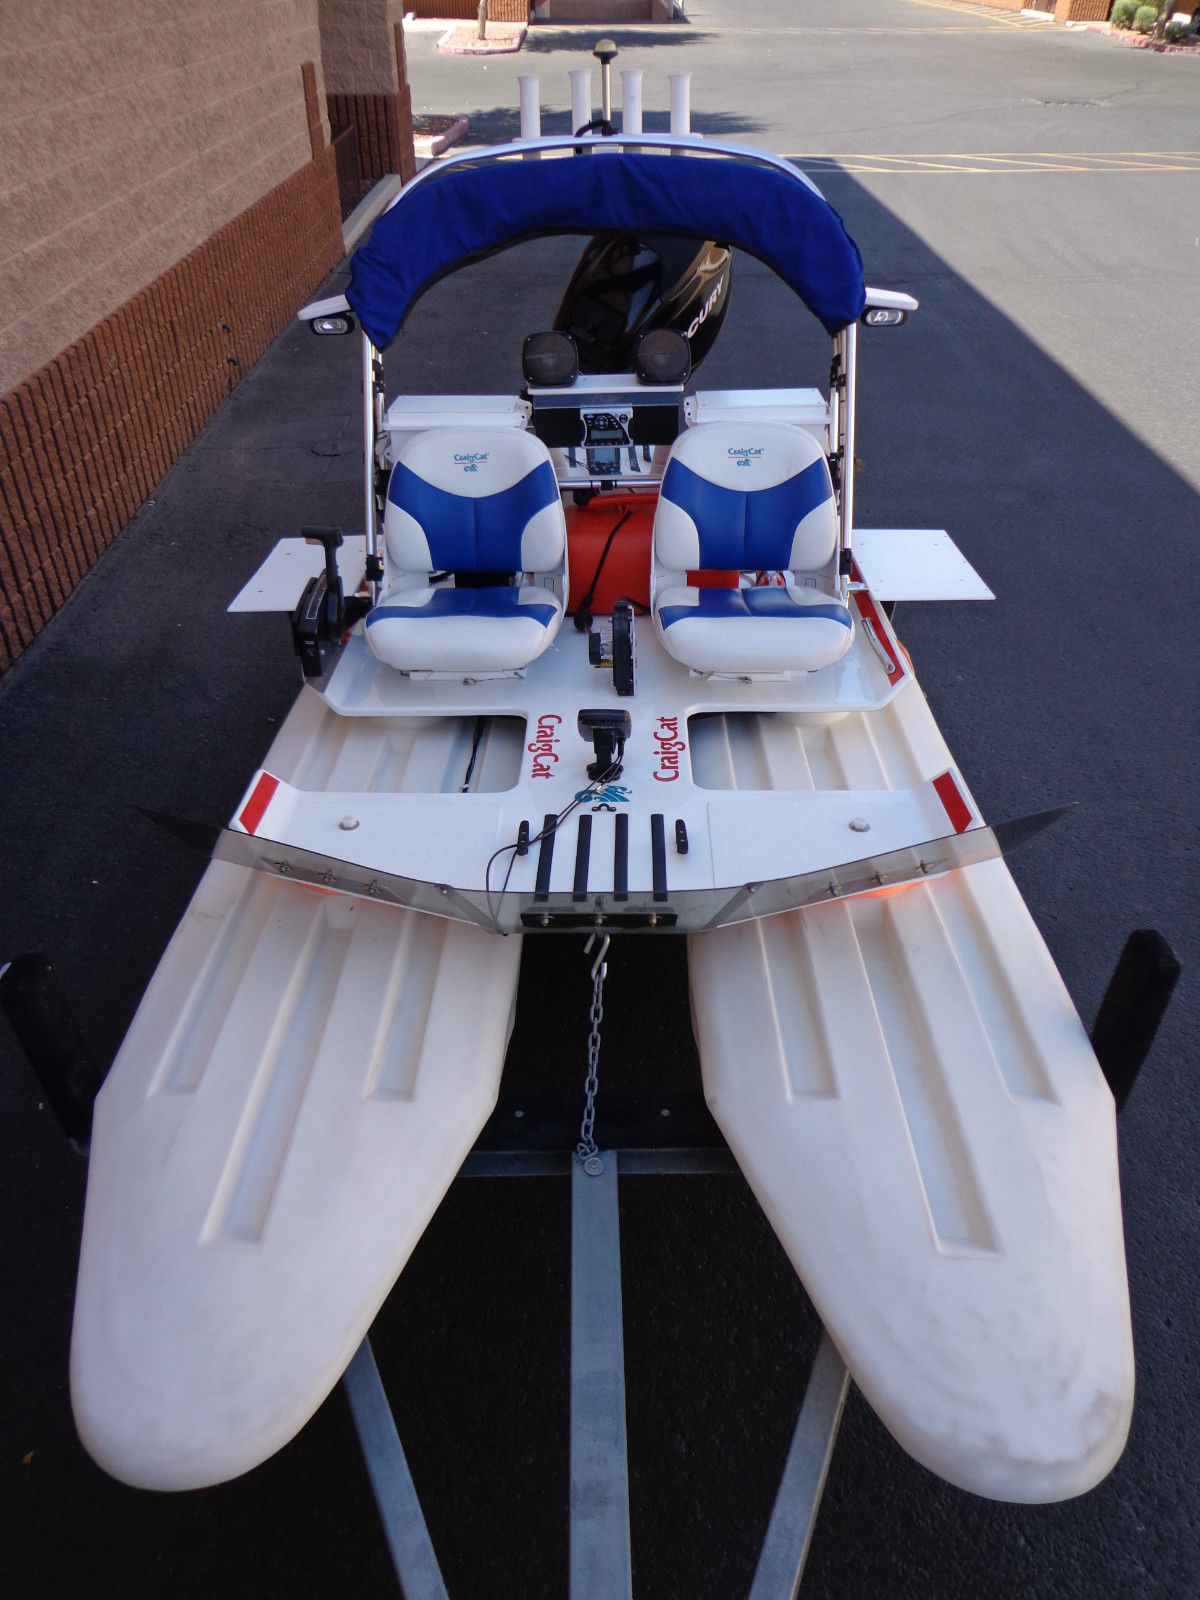 CraigCat E2 Elite 2009 for sale for $7,500 - Boats-from 